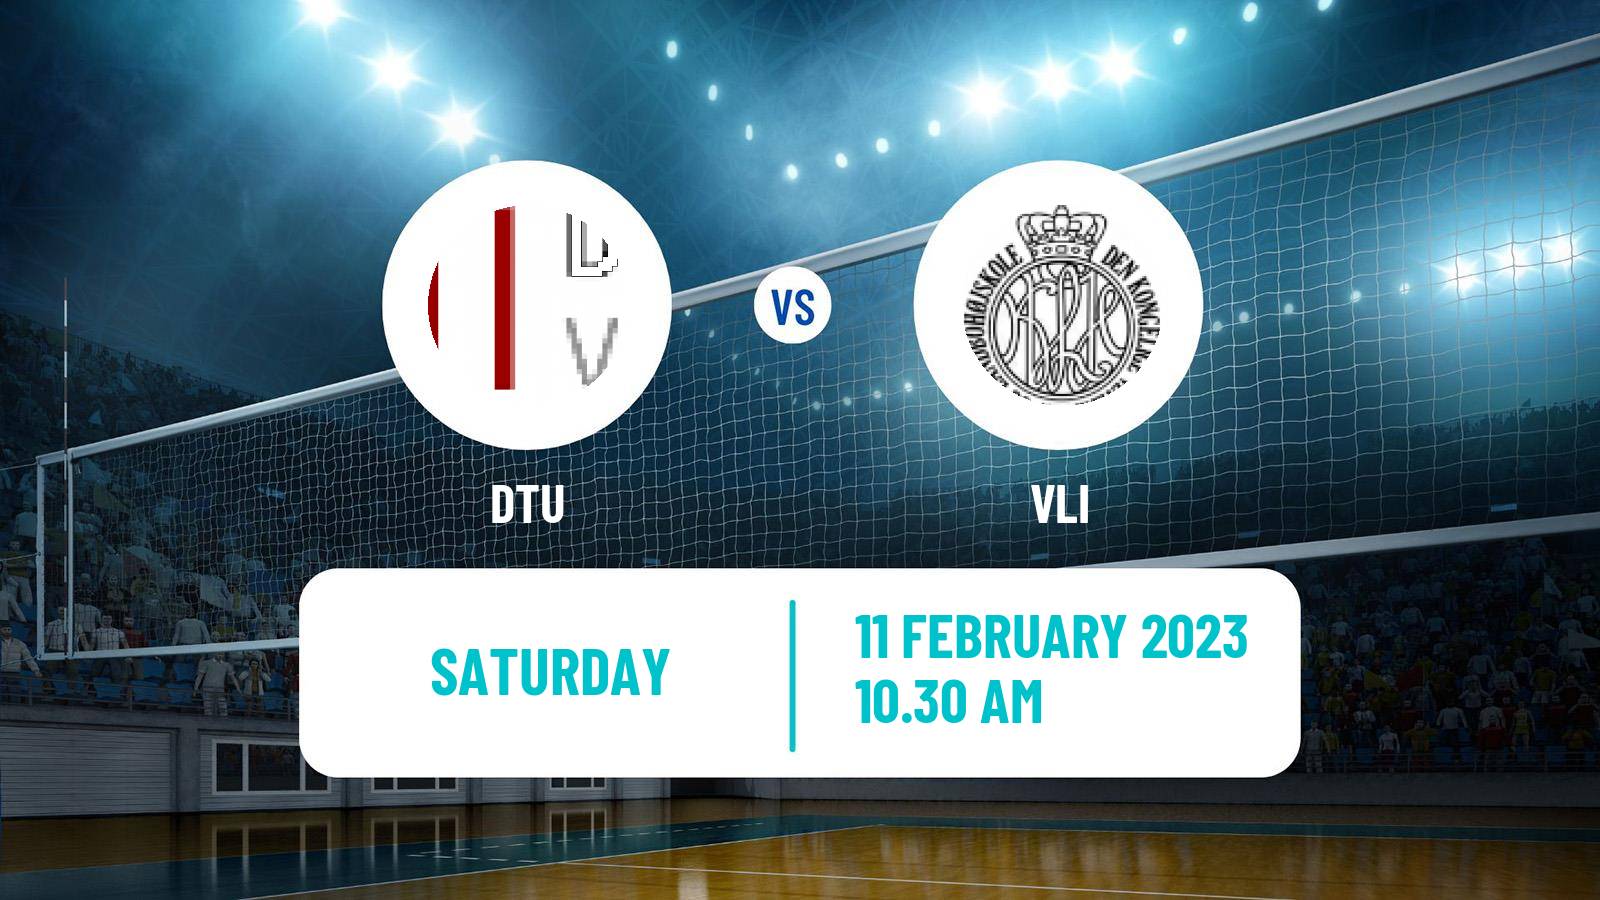 Volleyball Danish 1 Division East Volleyball Women DTU - VLI